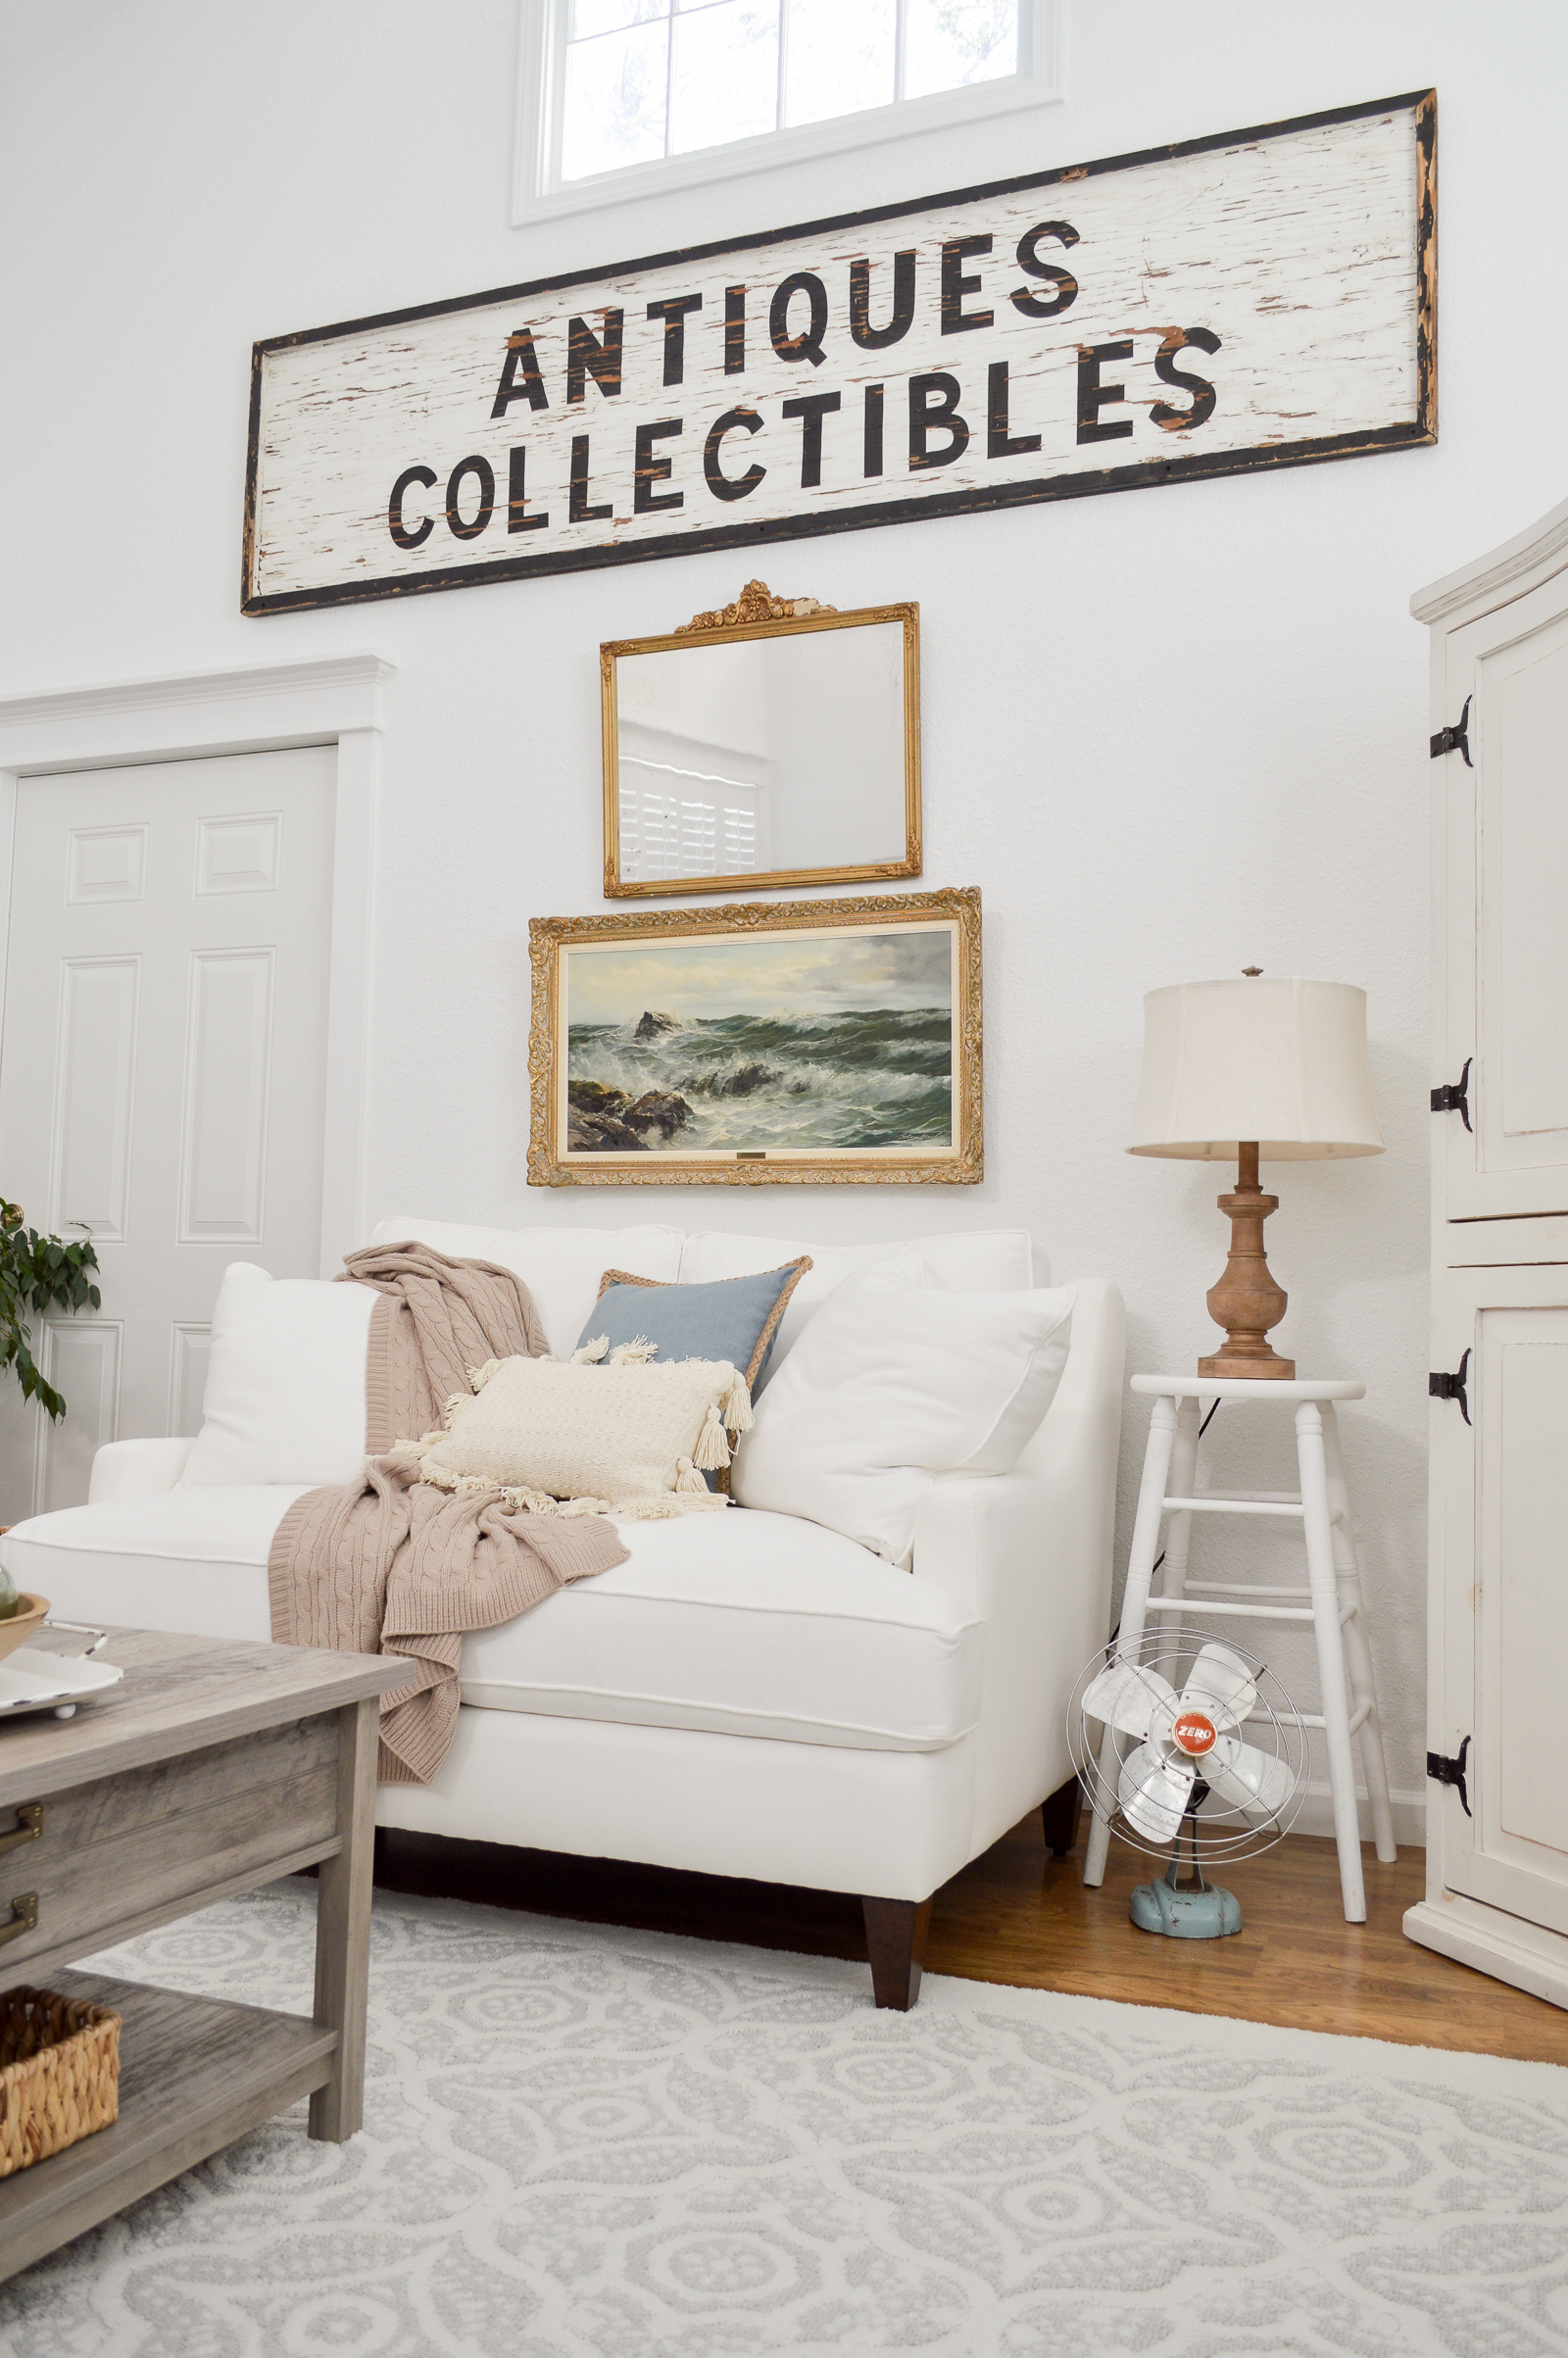 New Home Decorating Tips and Ideas - How to get that relaxed cottage farmhouse style. Great room/living room, take two. #sponsored with Better Homes & Gardens